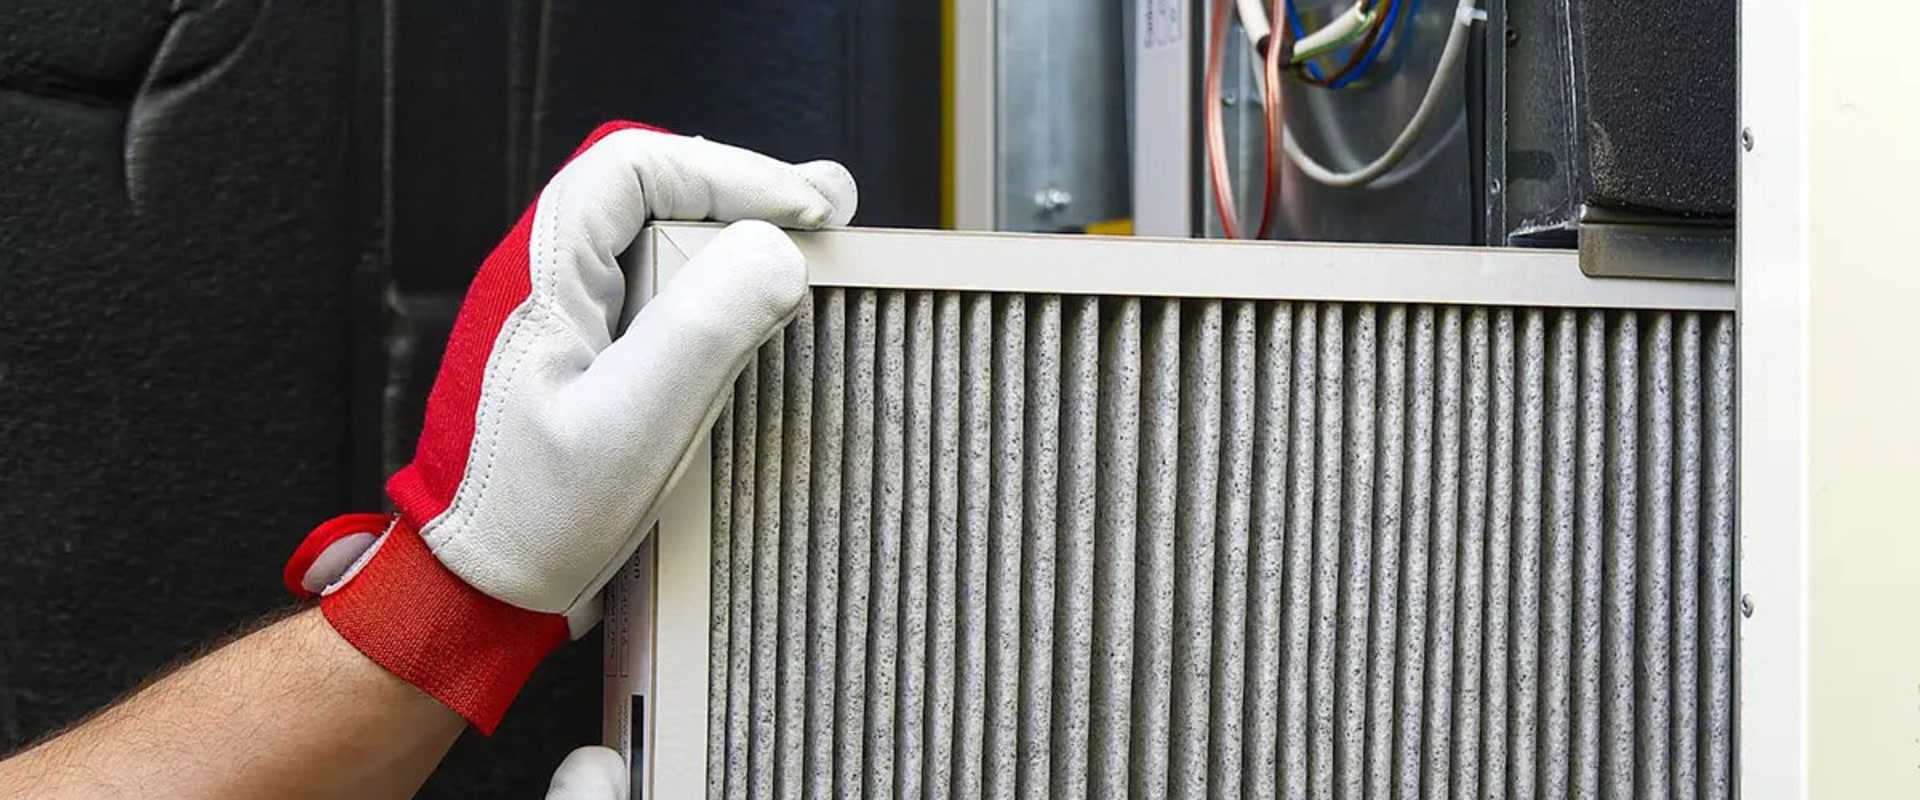 Choosing the Right Type of Air Filter for Your Furnace